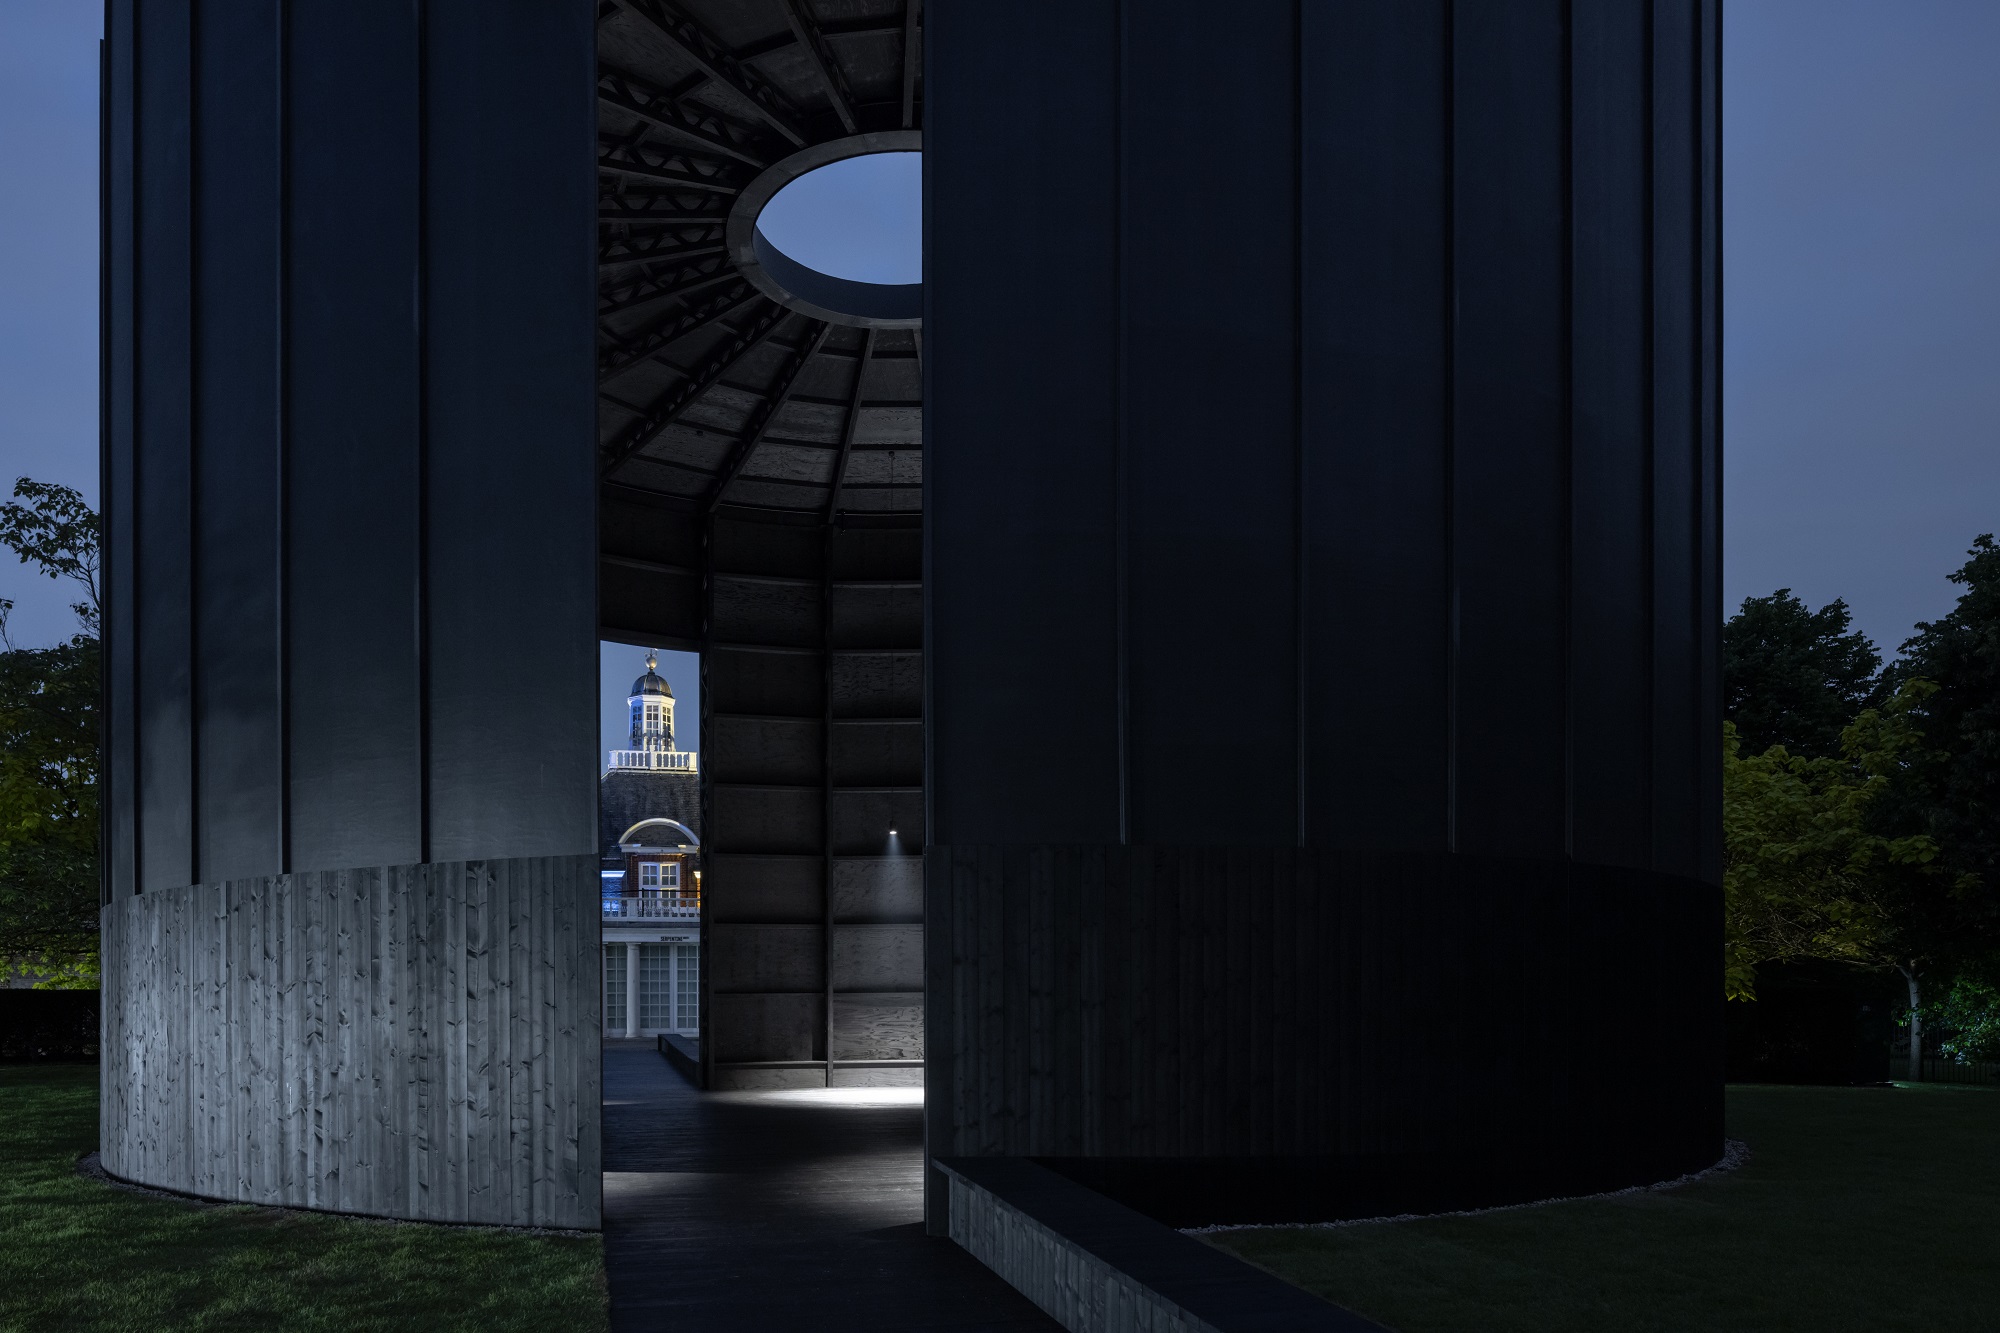 21st Serpentine Pavilion Officially Released, Featuring Theaster Gates' "Black Chapel"